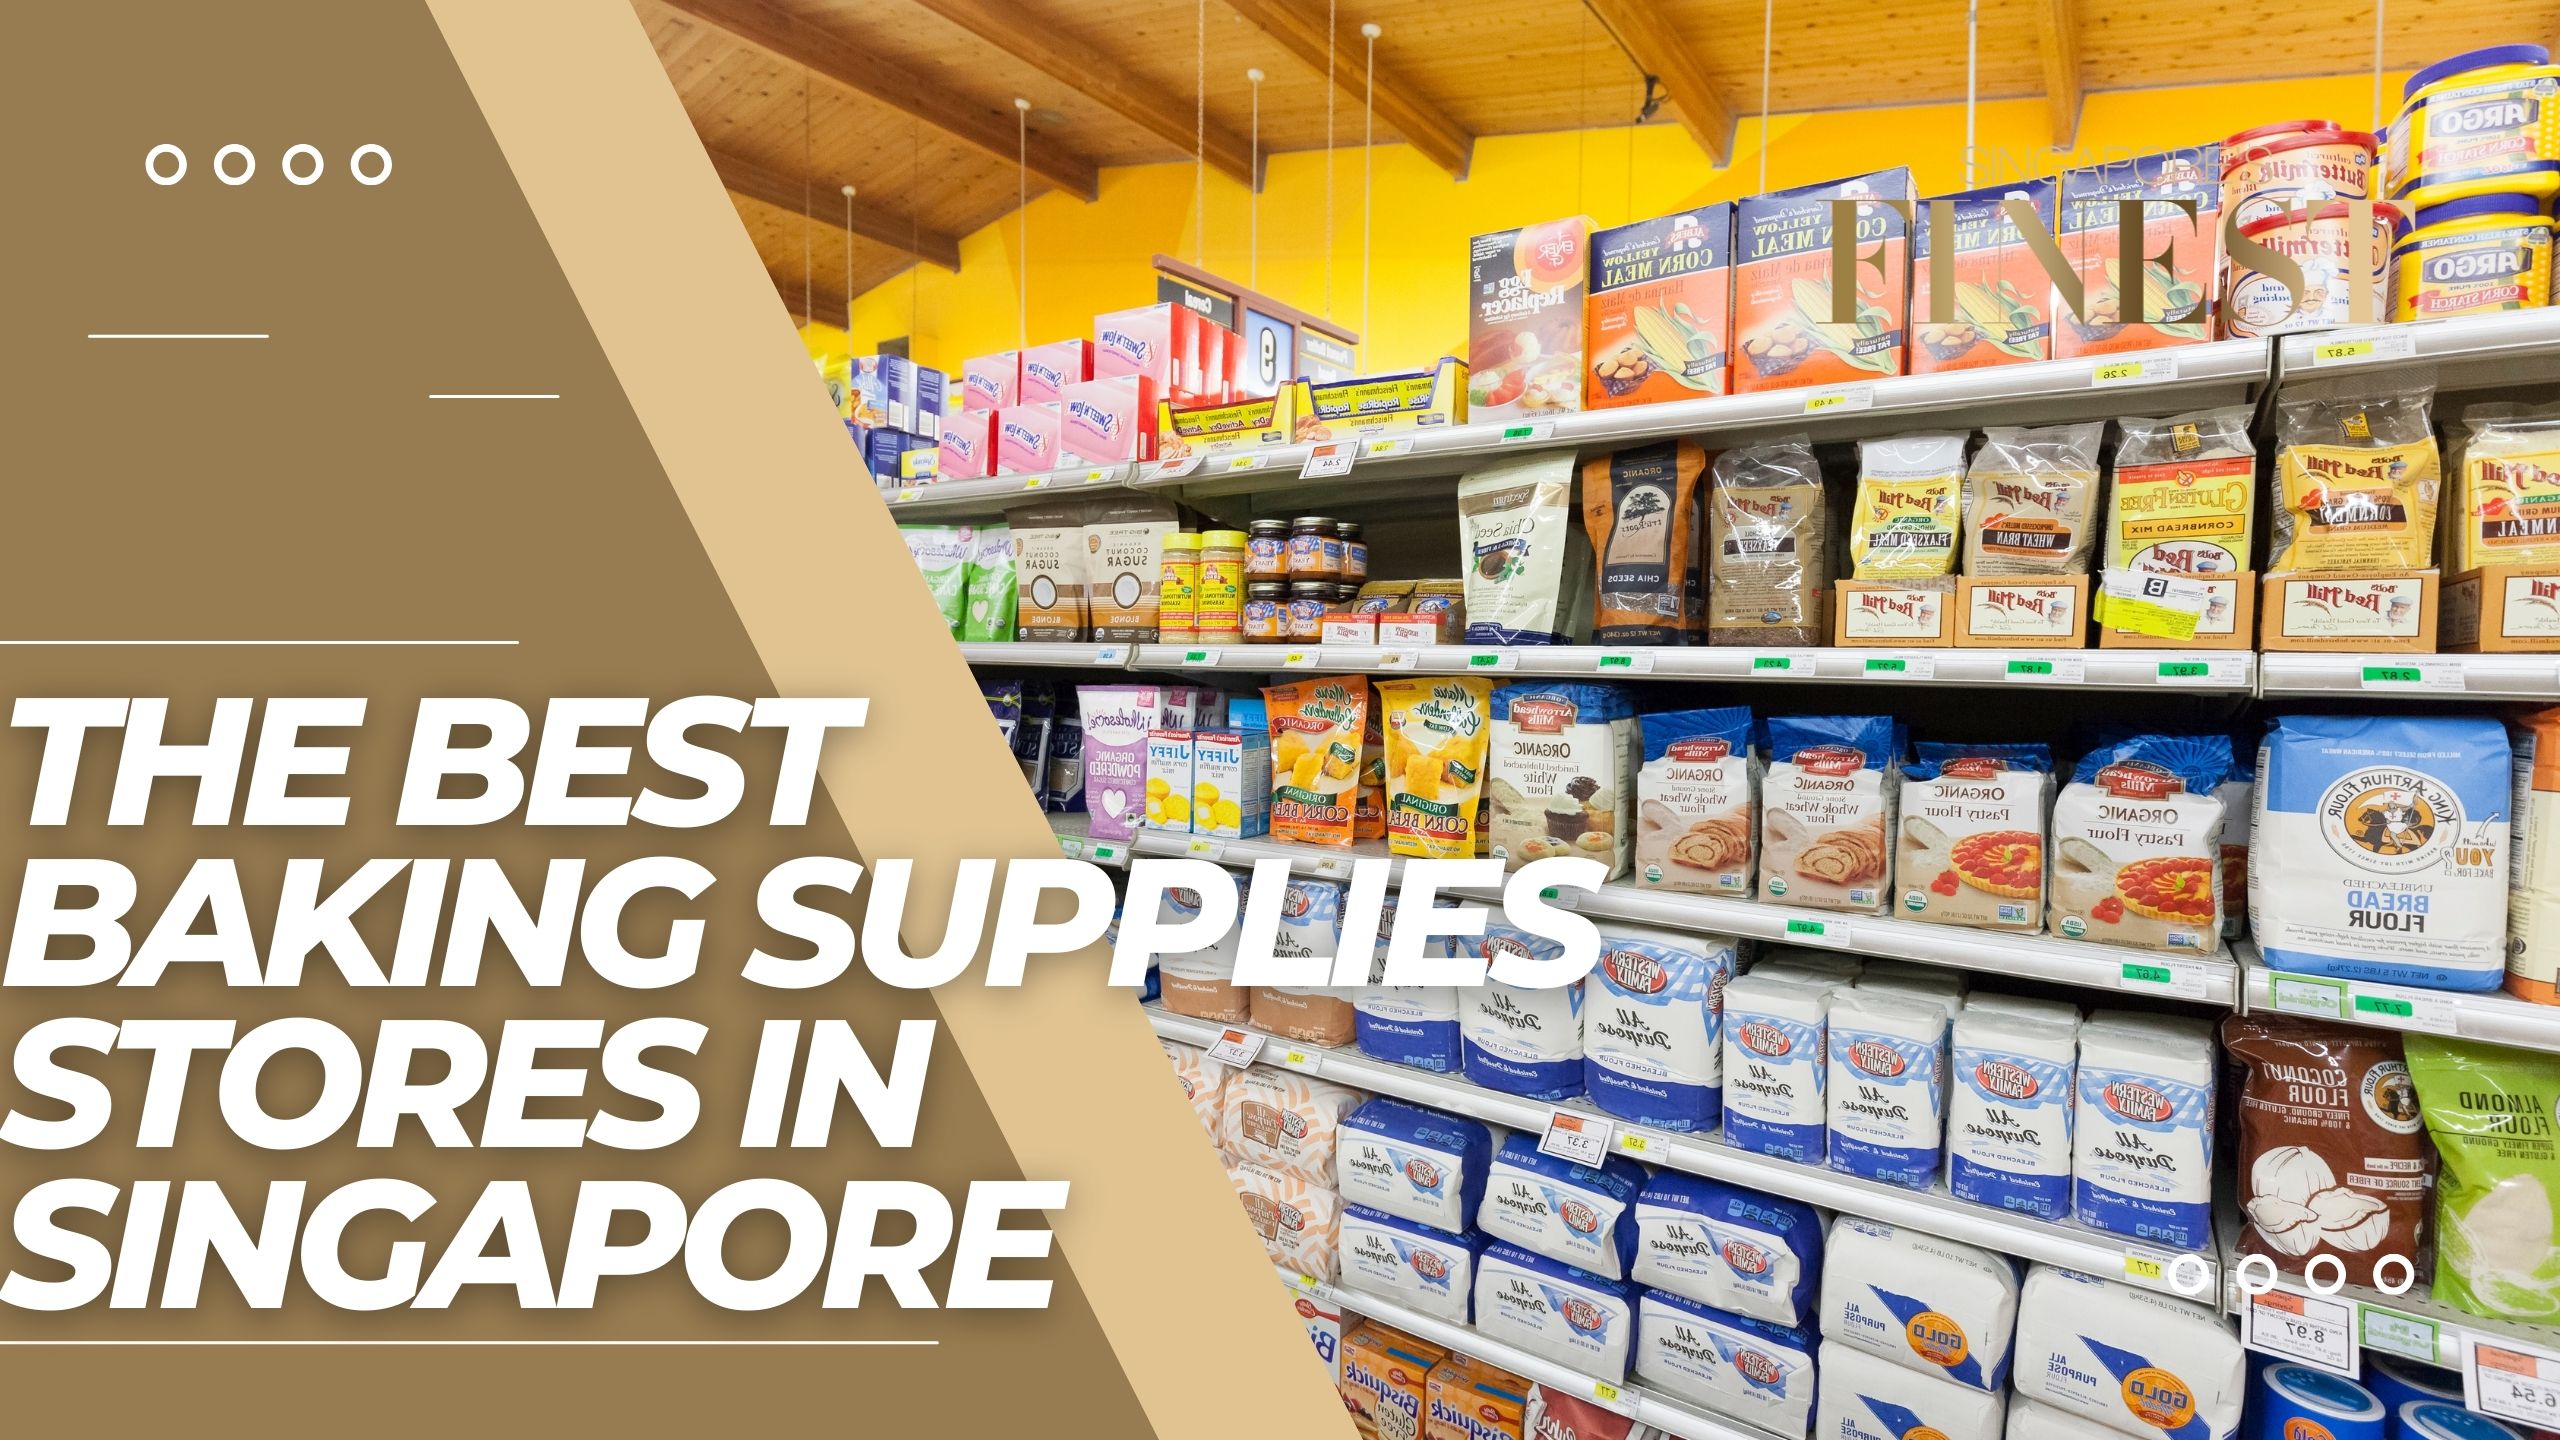 The Finest Baking Supplies Stores in Singapore